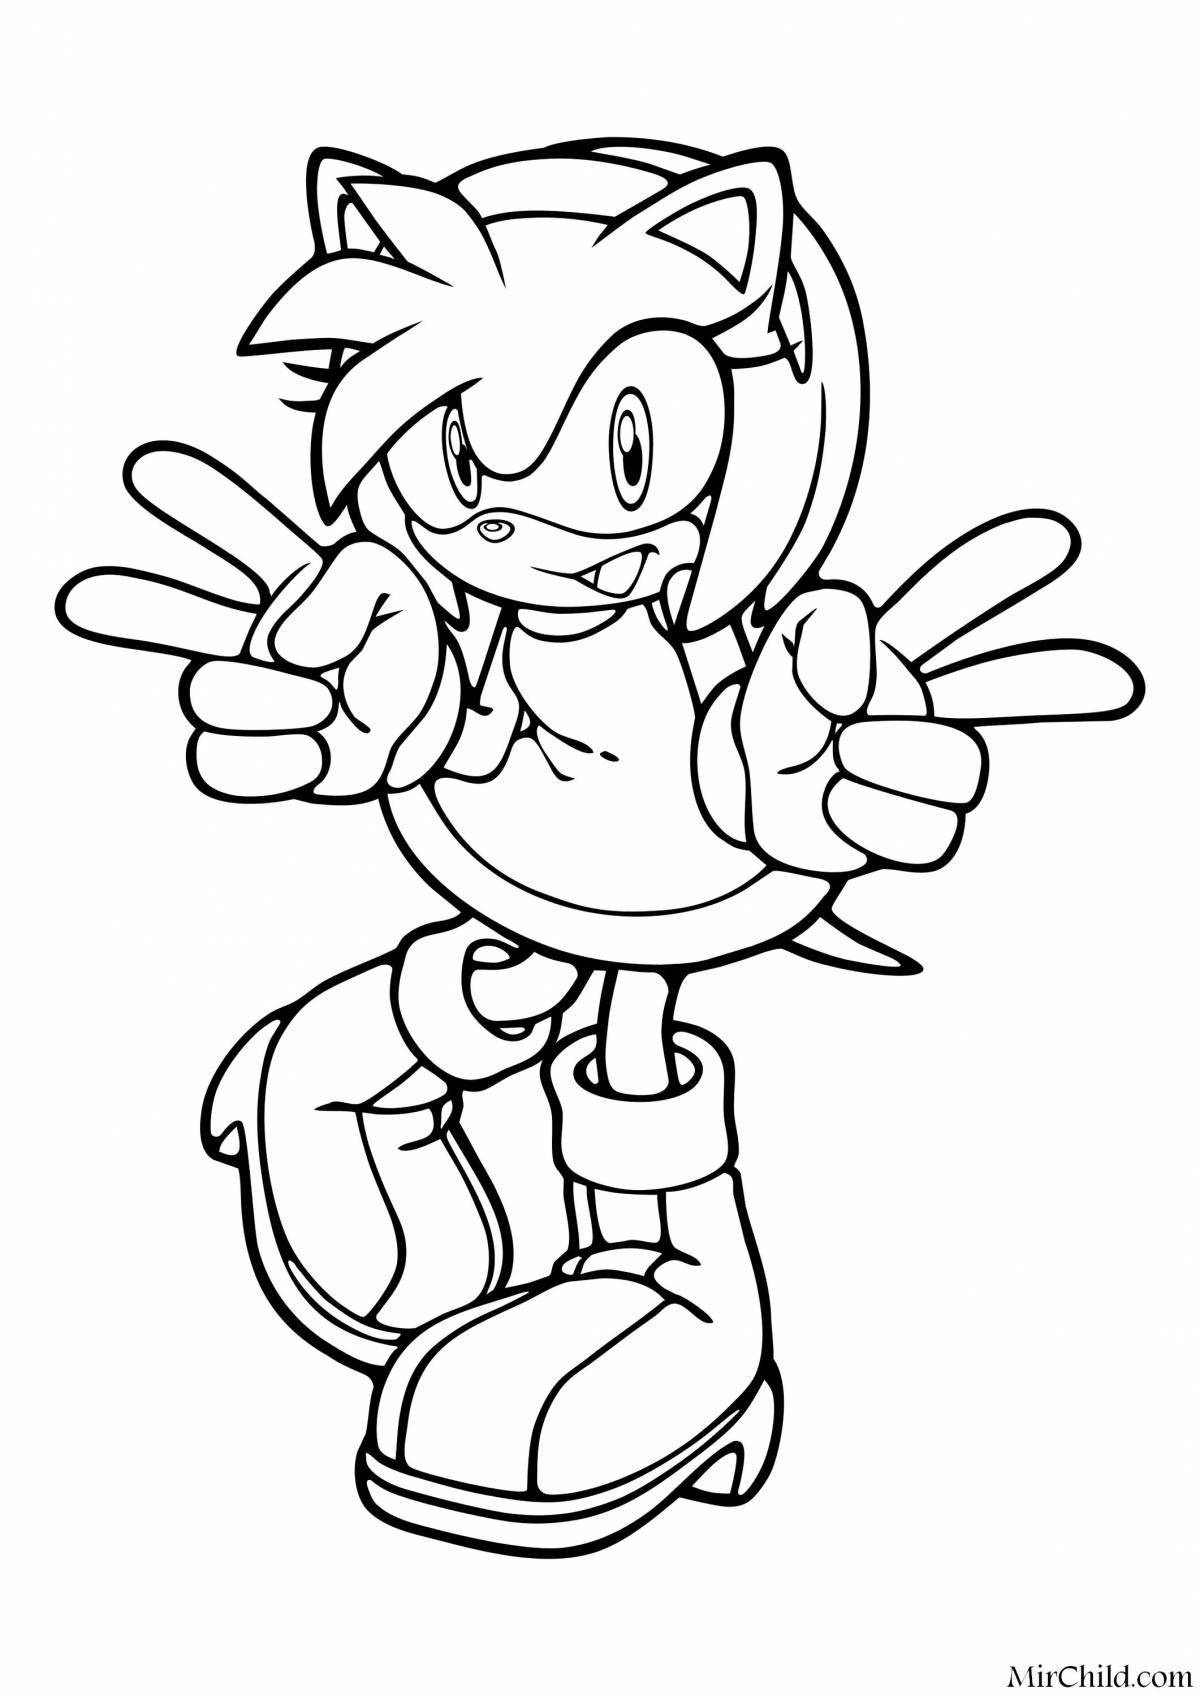 Playful coloring sonic and amy rose